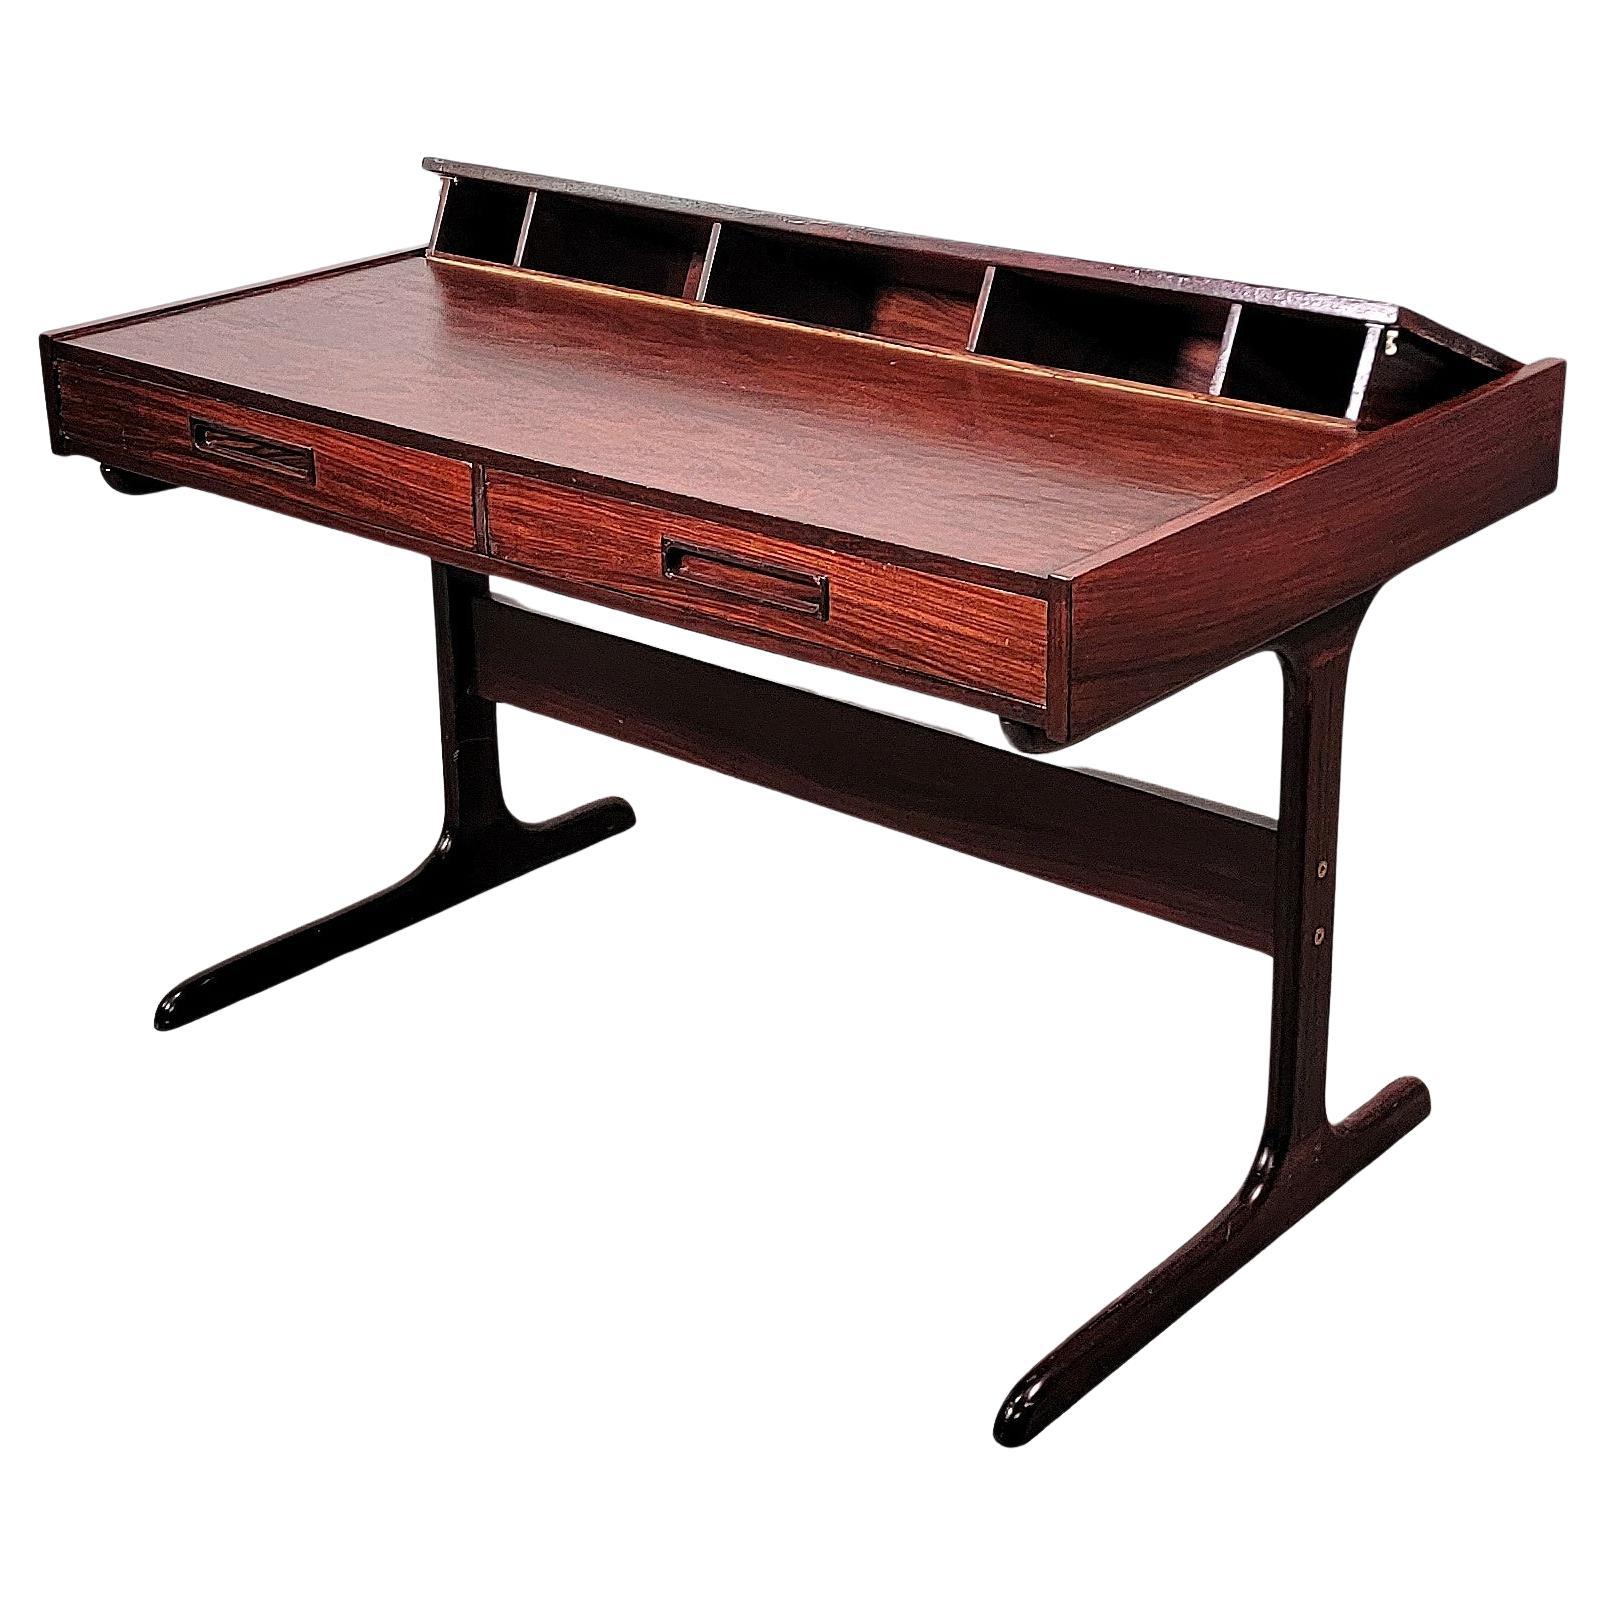 Beautiful Danish desk or vanity table featuring highly figured rosewood on a rectangular form with 2 front drawers, and a solid rosewood trestle base. The writing table has a pop up 5 cubby organizer, 11